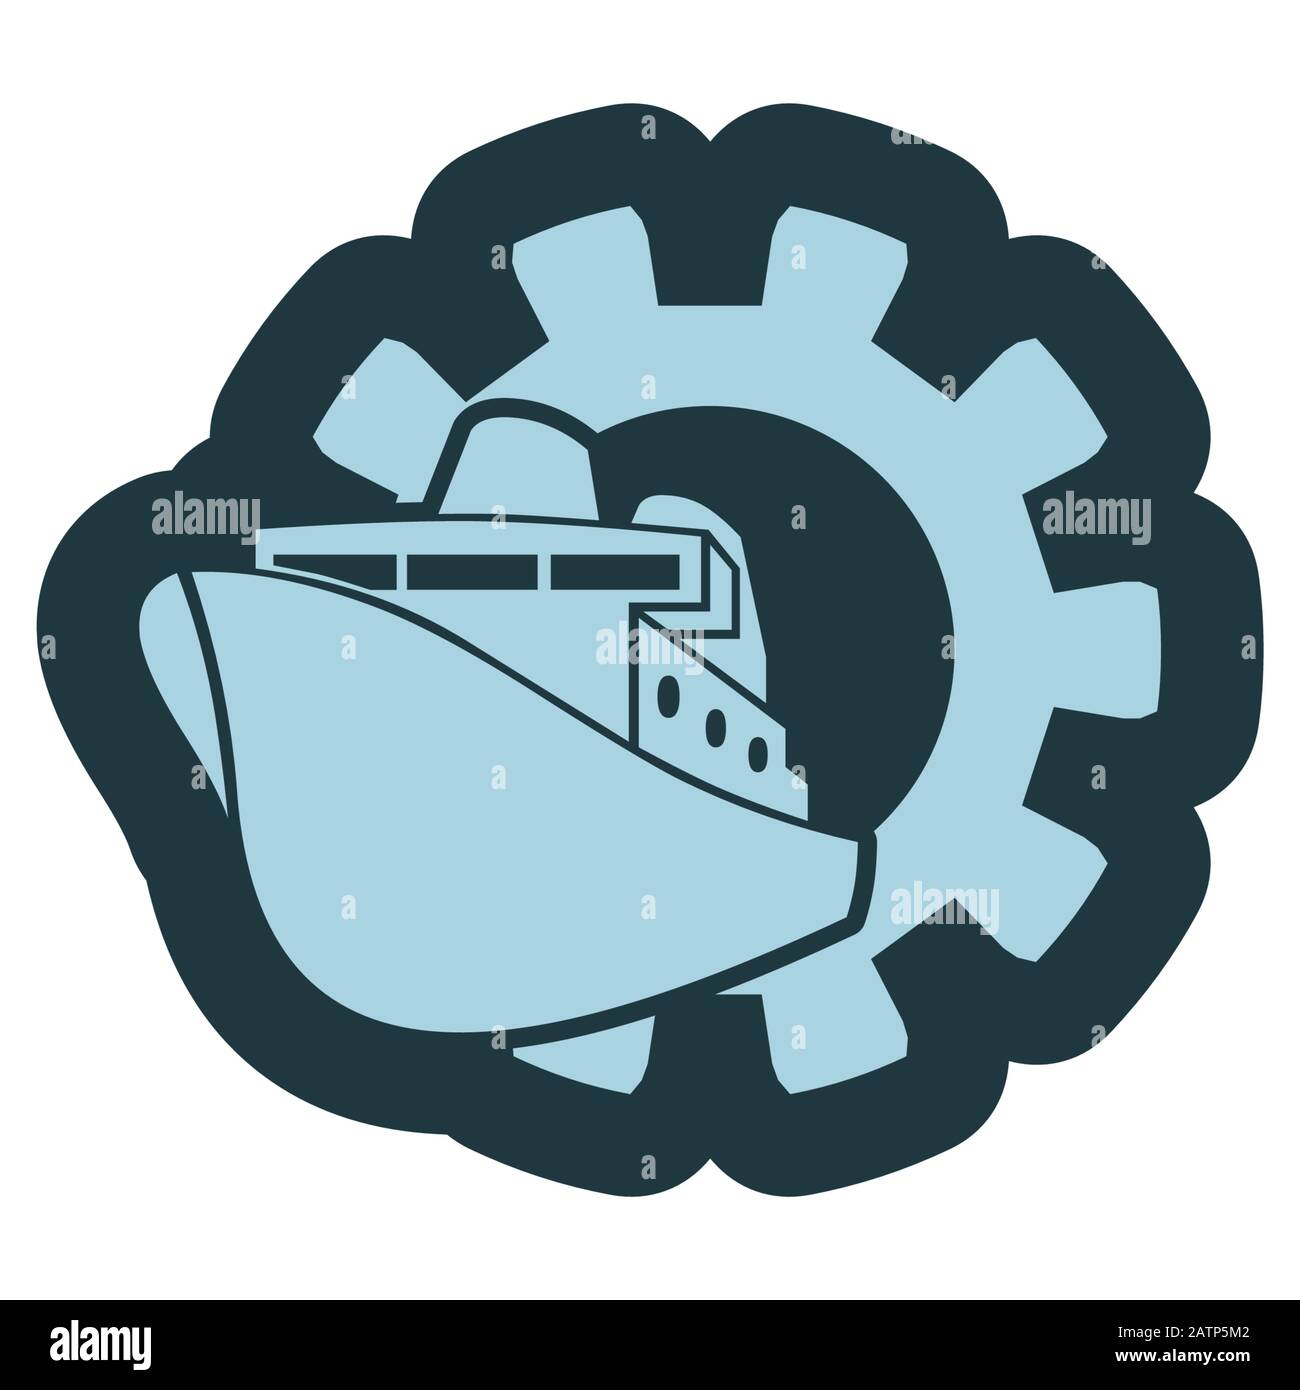 Ferry boat icon in gear Stock Vector